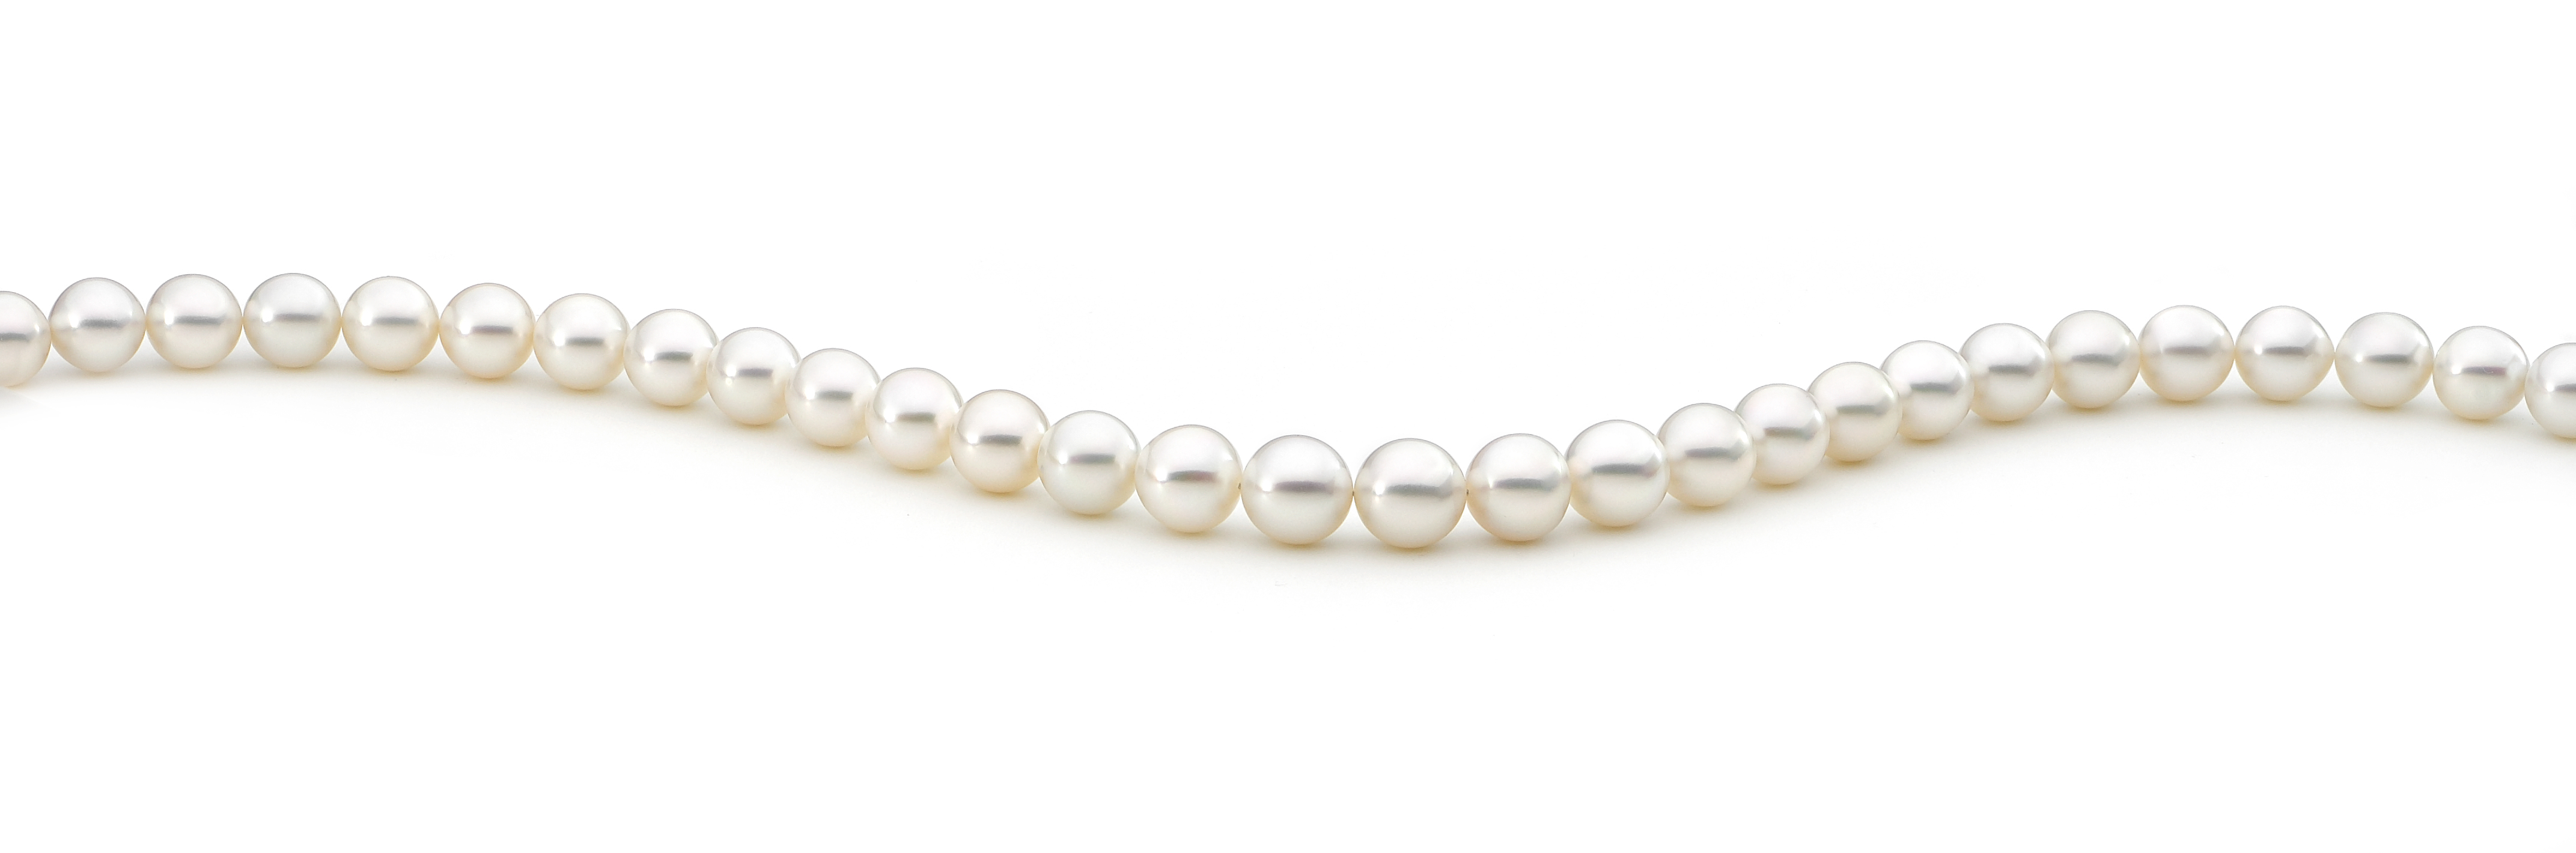 Caring for pearl jewellery